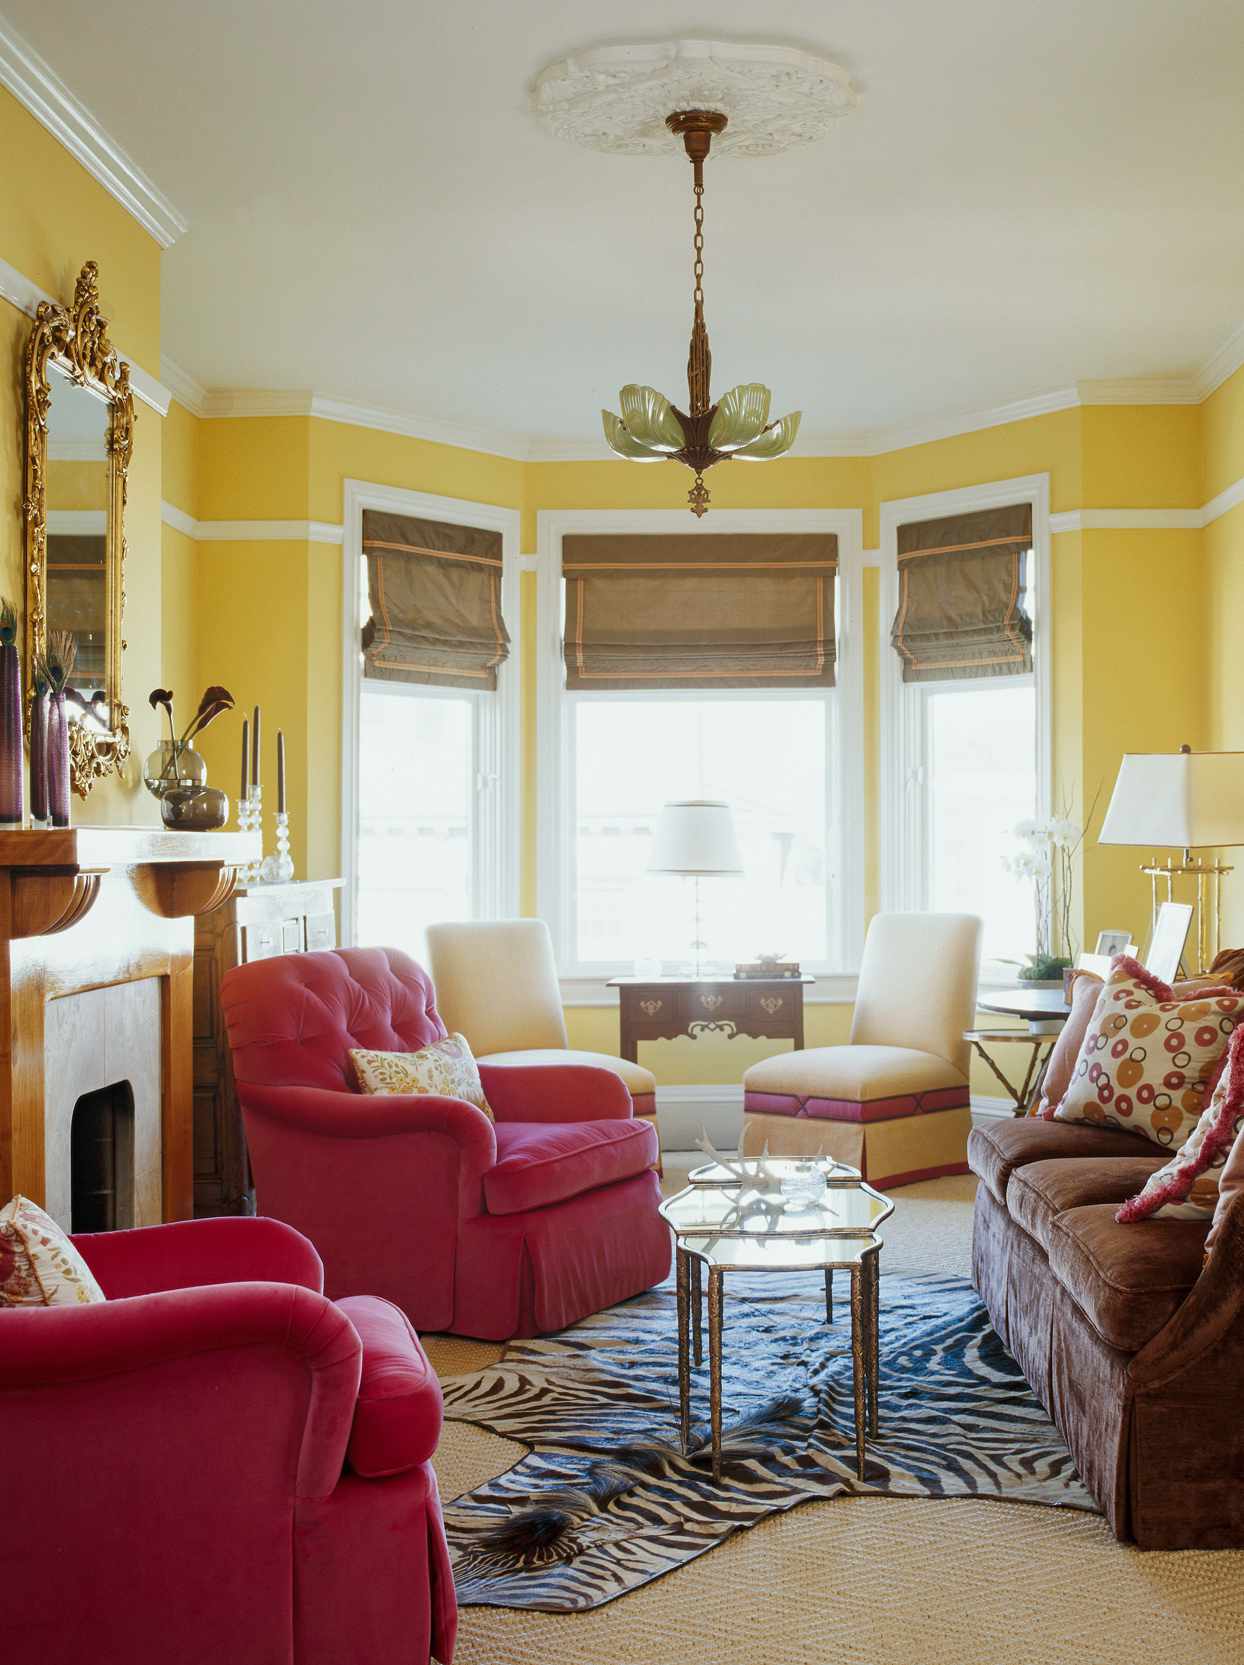 23 Yellow Living Room Ideas For A Bright Happy Space Better Homes Gardens